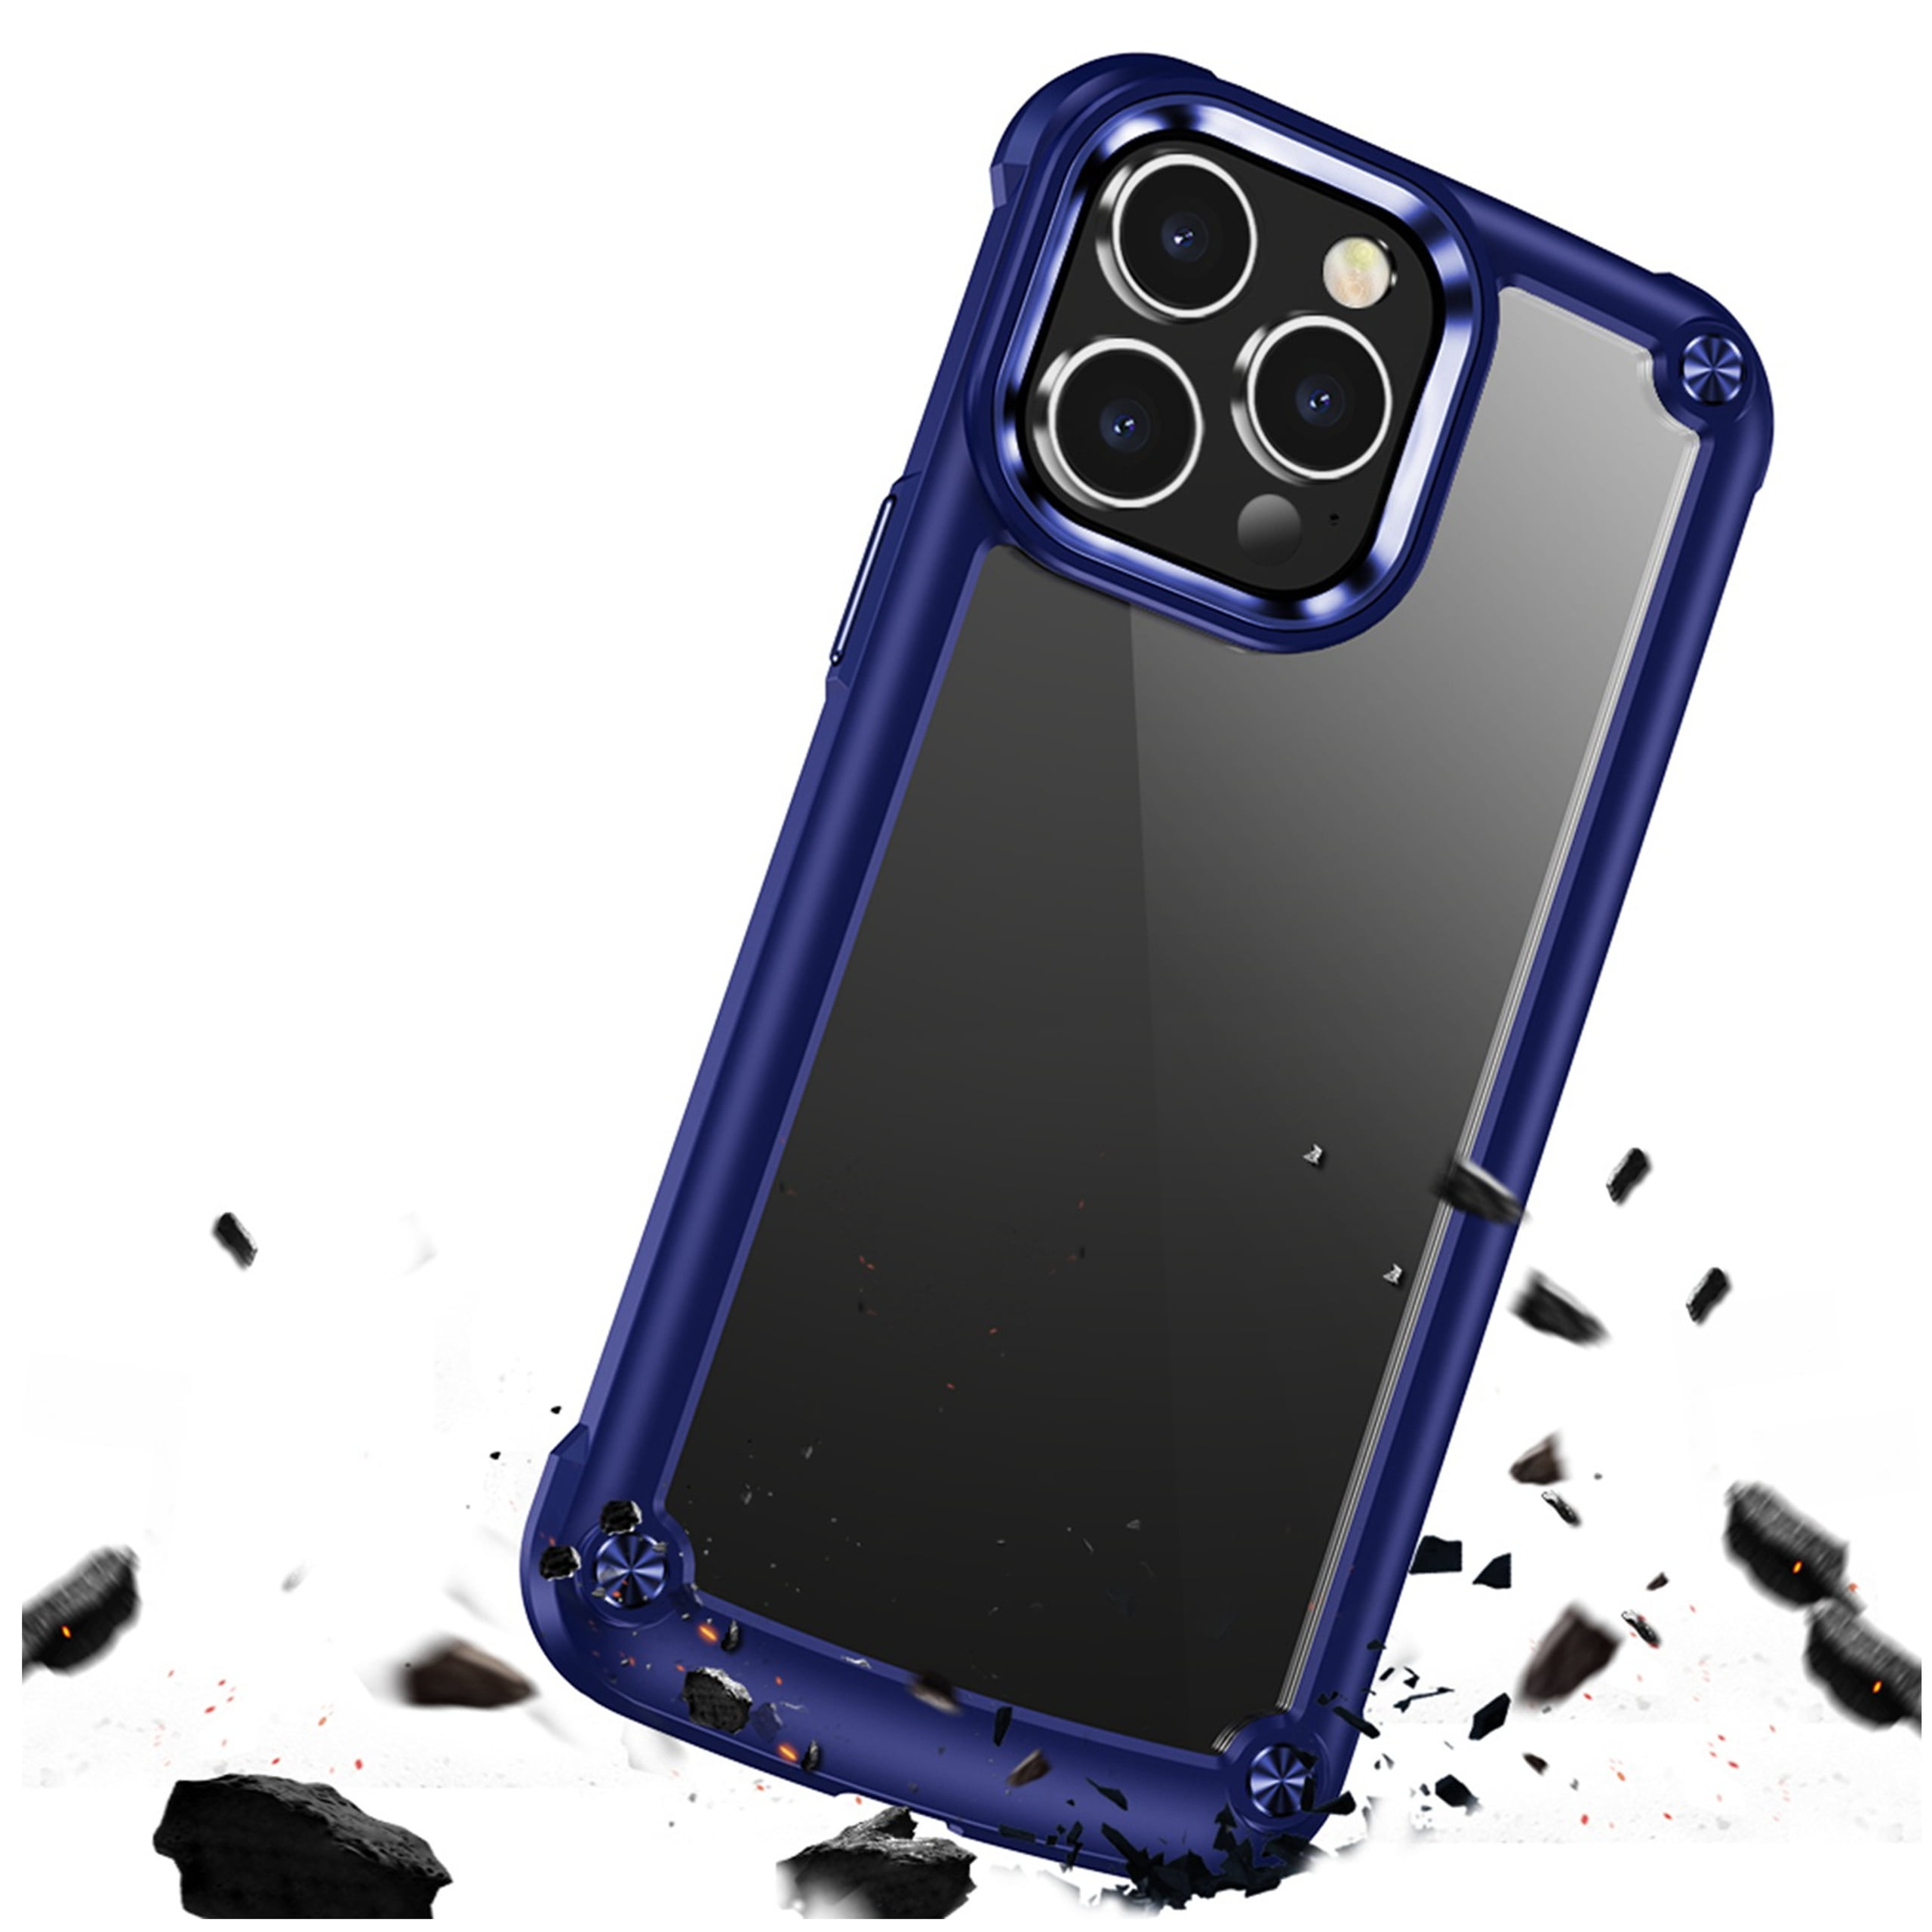  YBROY Case for Xiaomi 12S Ultra, Soft TPU + Hard PC, Full Body  Rugged Shockproof Case, Stand Function, Anti-Scratch Cover for Xiaomi 12S  Ultra.(Blue) : Cell Phones & Accessories